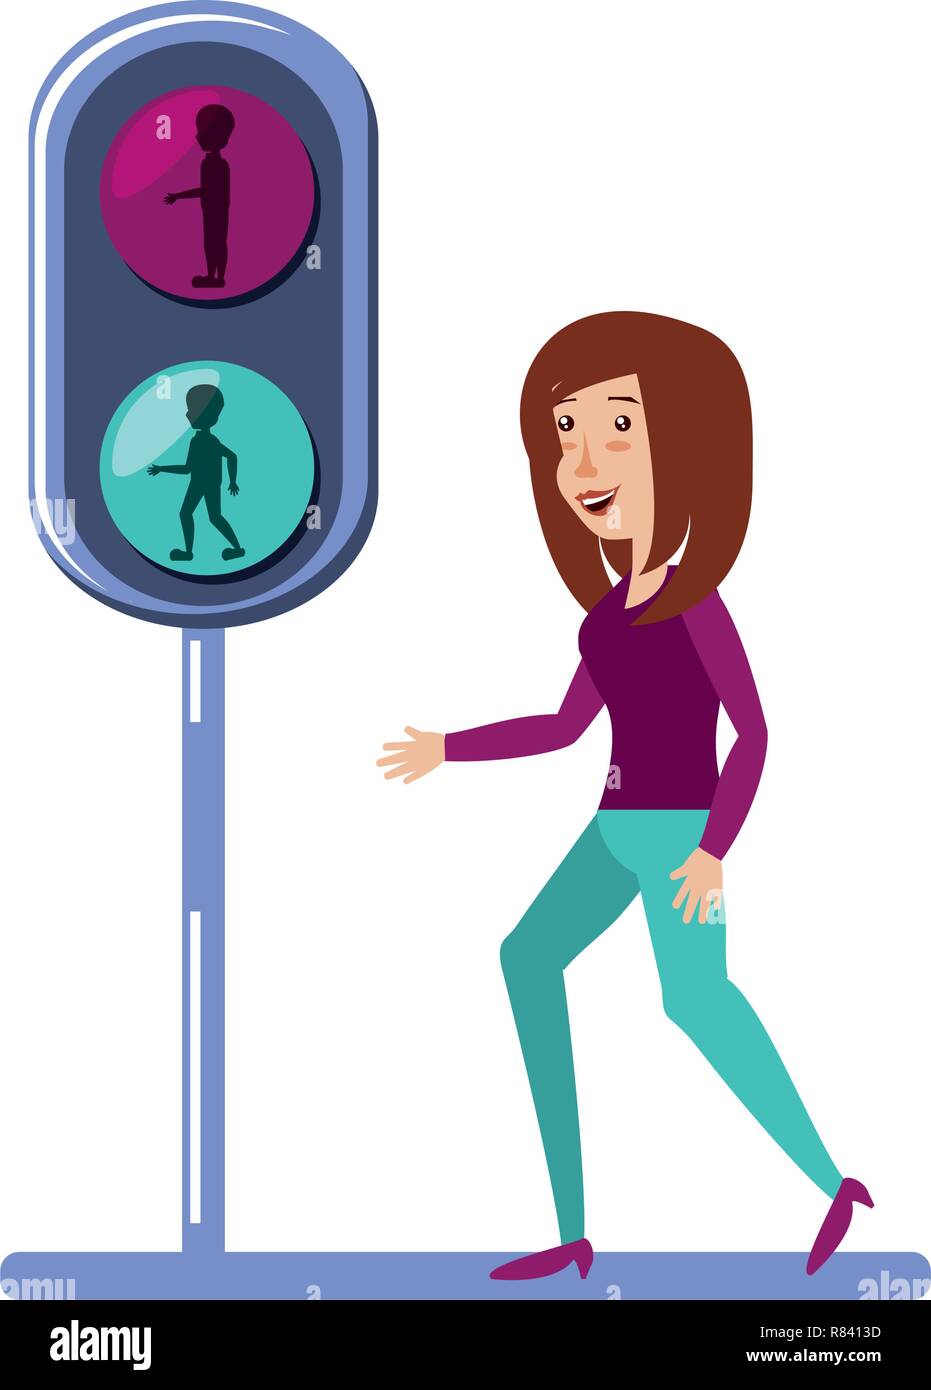 young woman with traffic light pedestrian vector illustration design Stock Vector